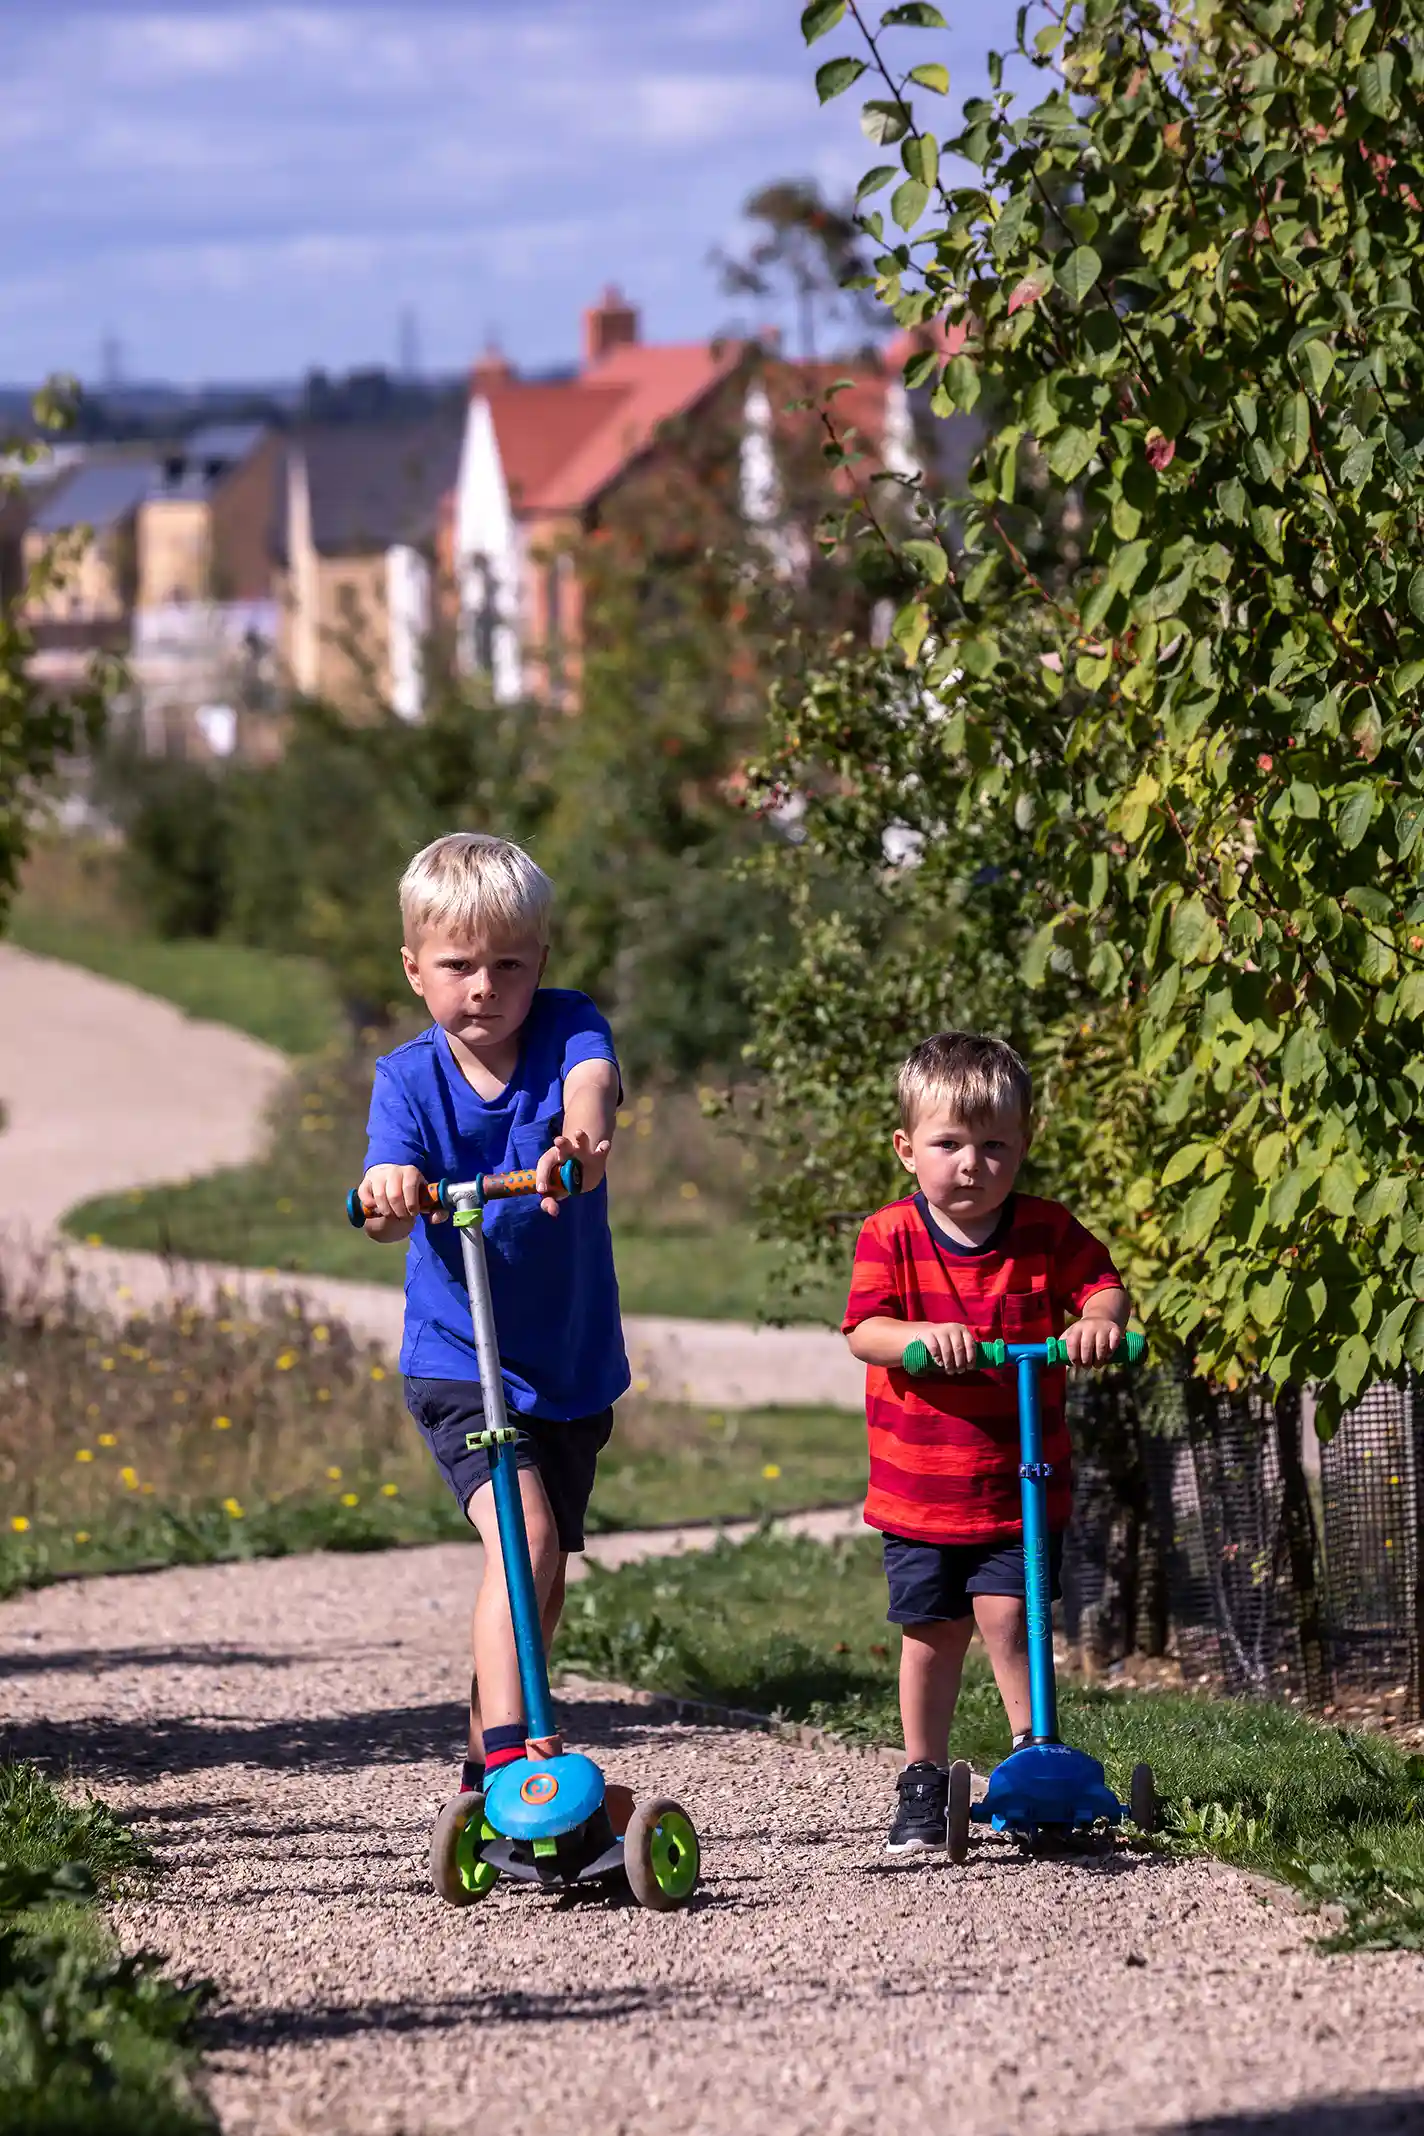 Two toddlers on scooters, riding along a path 